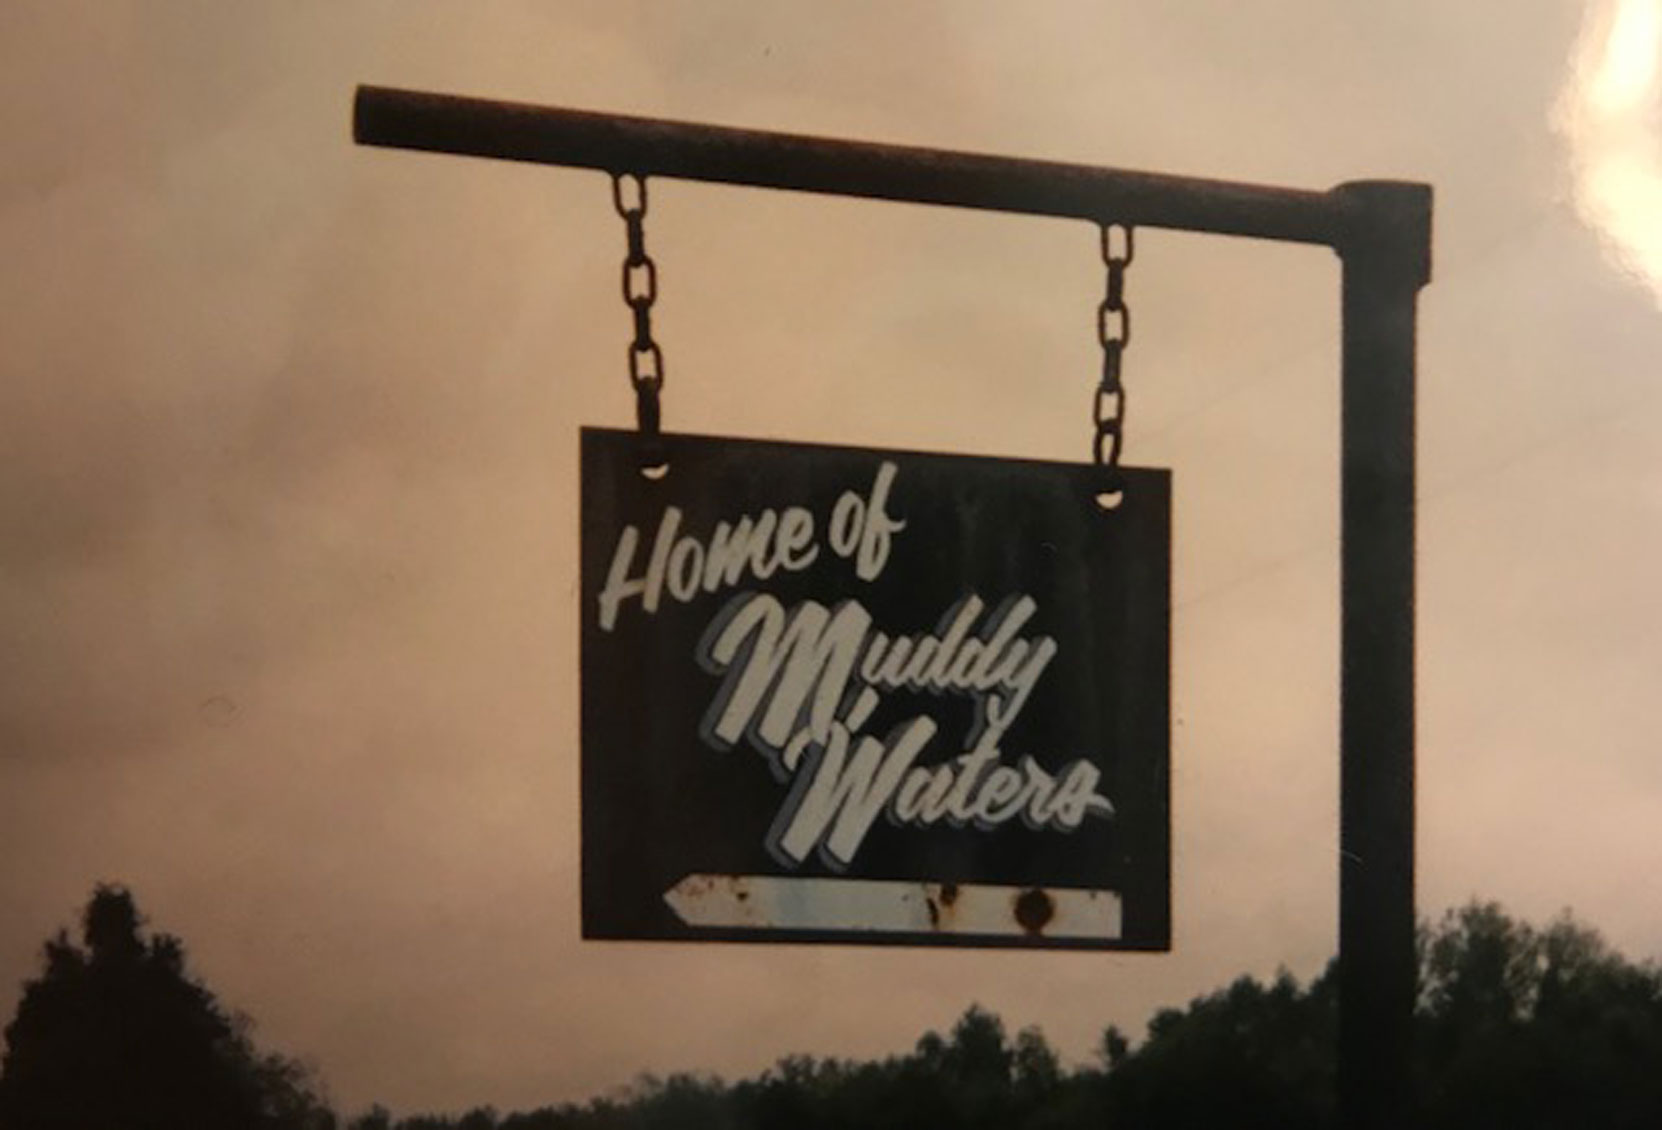 Sign outside the Muddy Waters cabin, Stovall Farms, Clarksdale, Mississippi, circa 1990's (photo: Larry Amato)